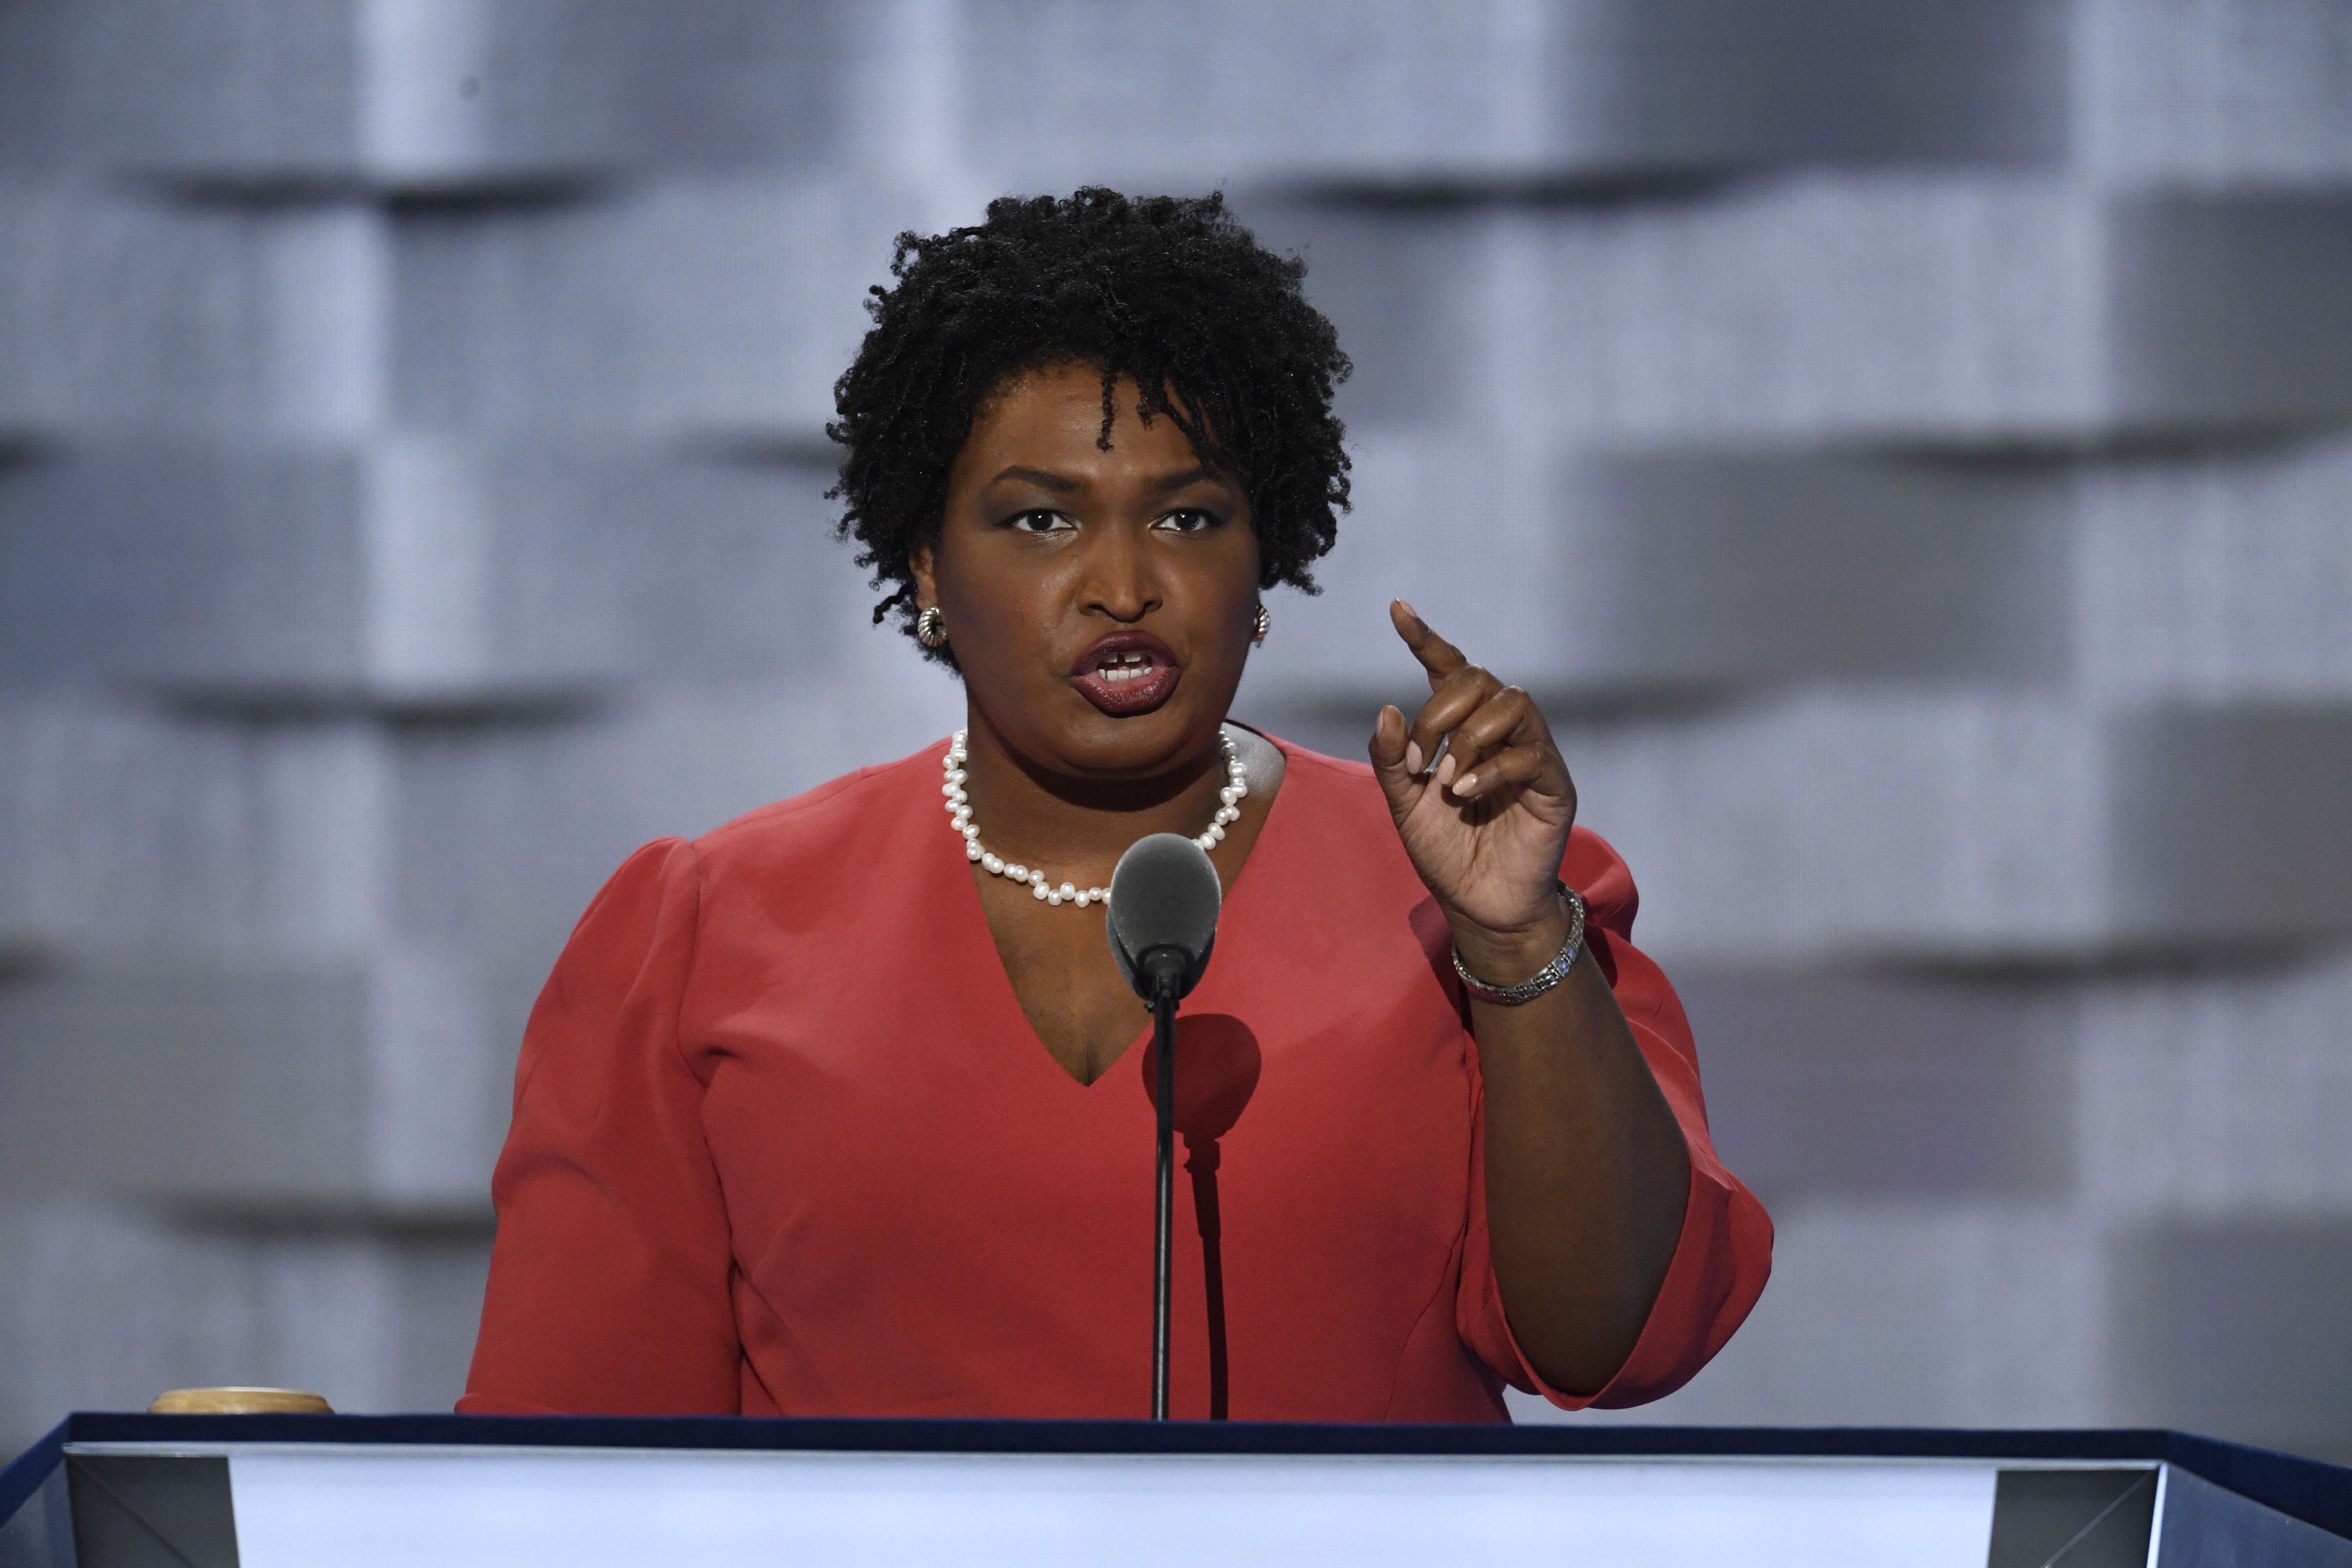 Representative Stacey Abrams, a Democrat from Georgia, speaks during the Democratic National Convention (DNC) in Philadelphia, Pennsylvania, U.S., on Monday, July 25, 2016 (Bloomberg&mdash;Bloomberg via Getty Images)